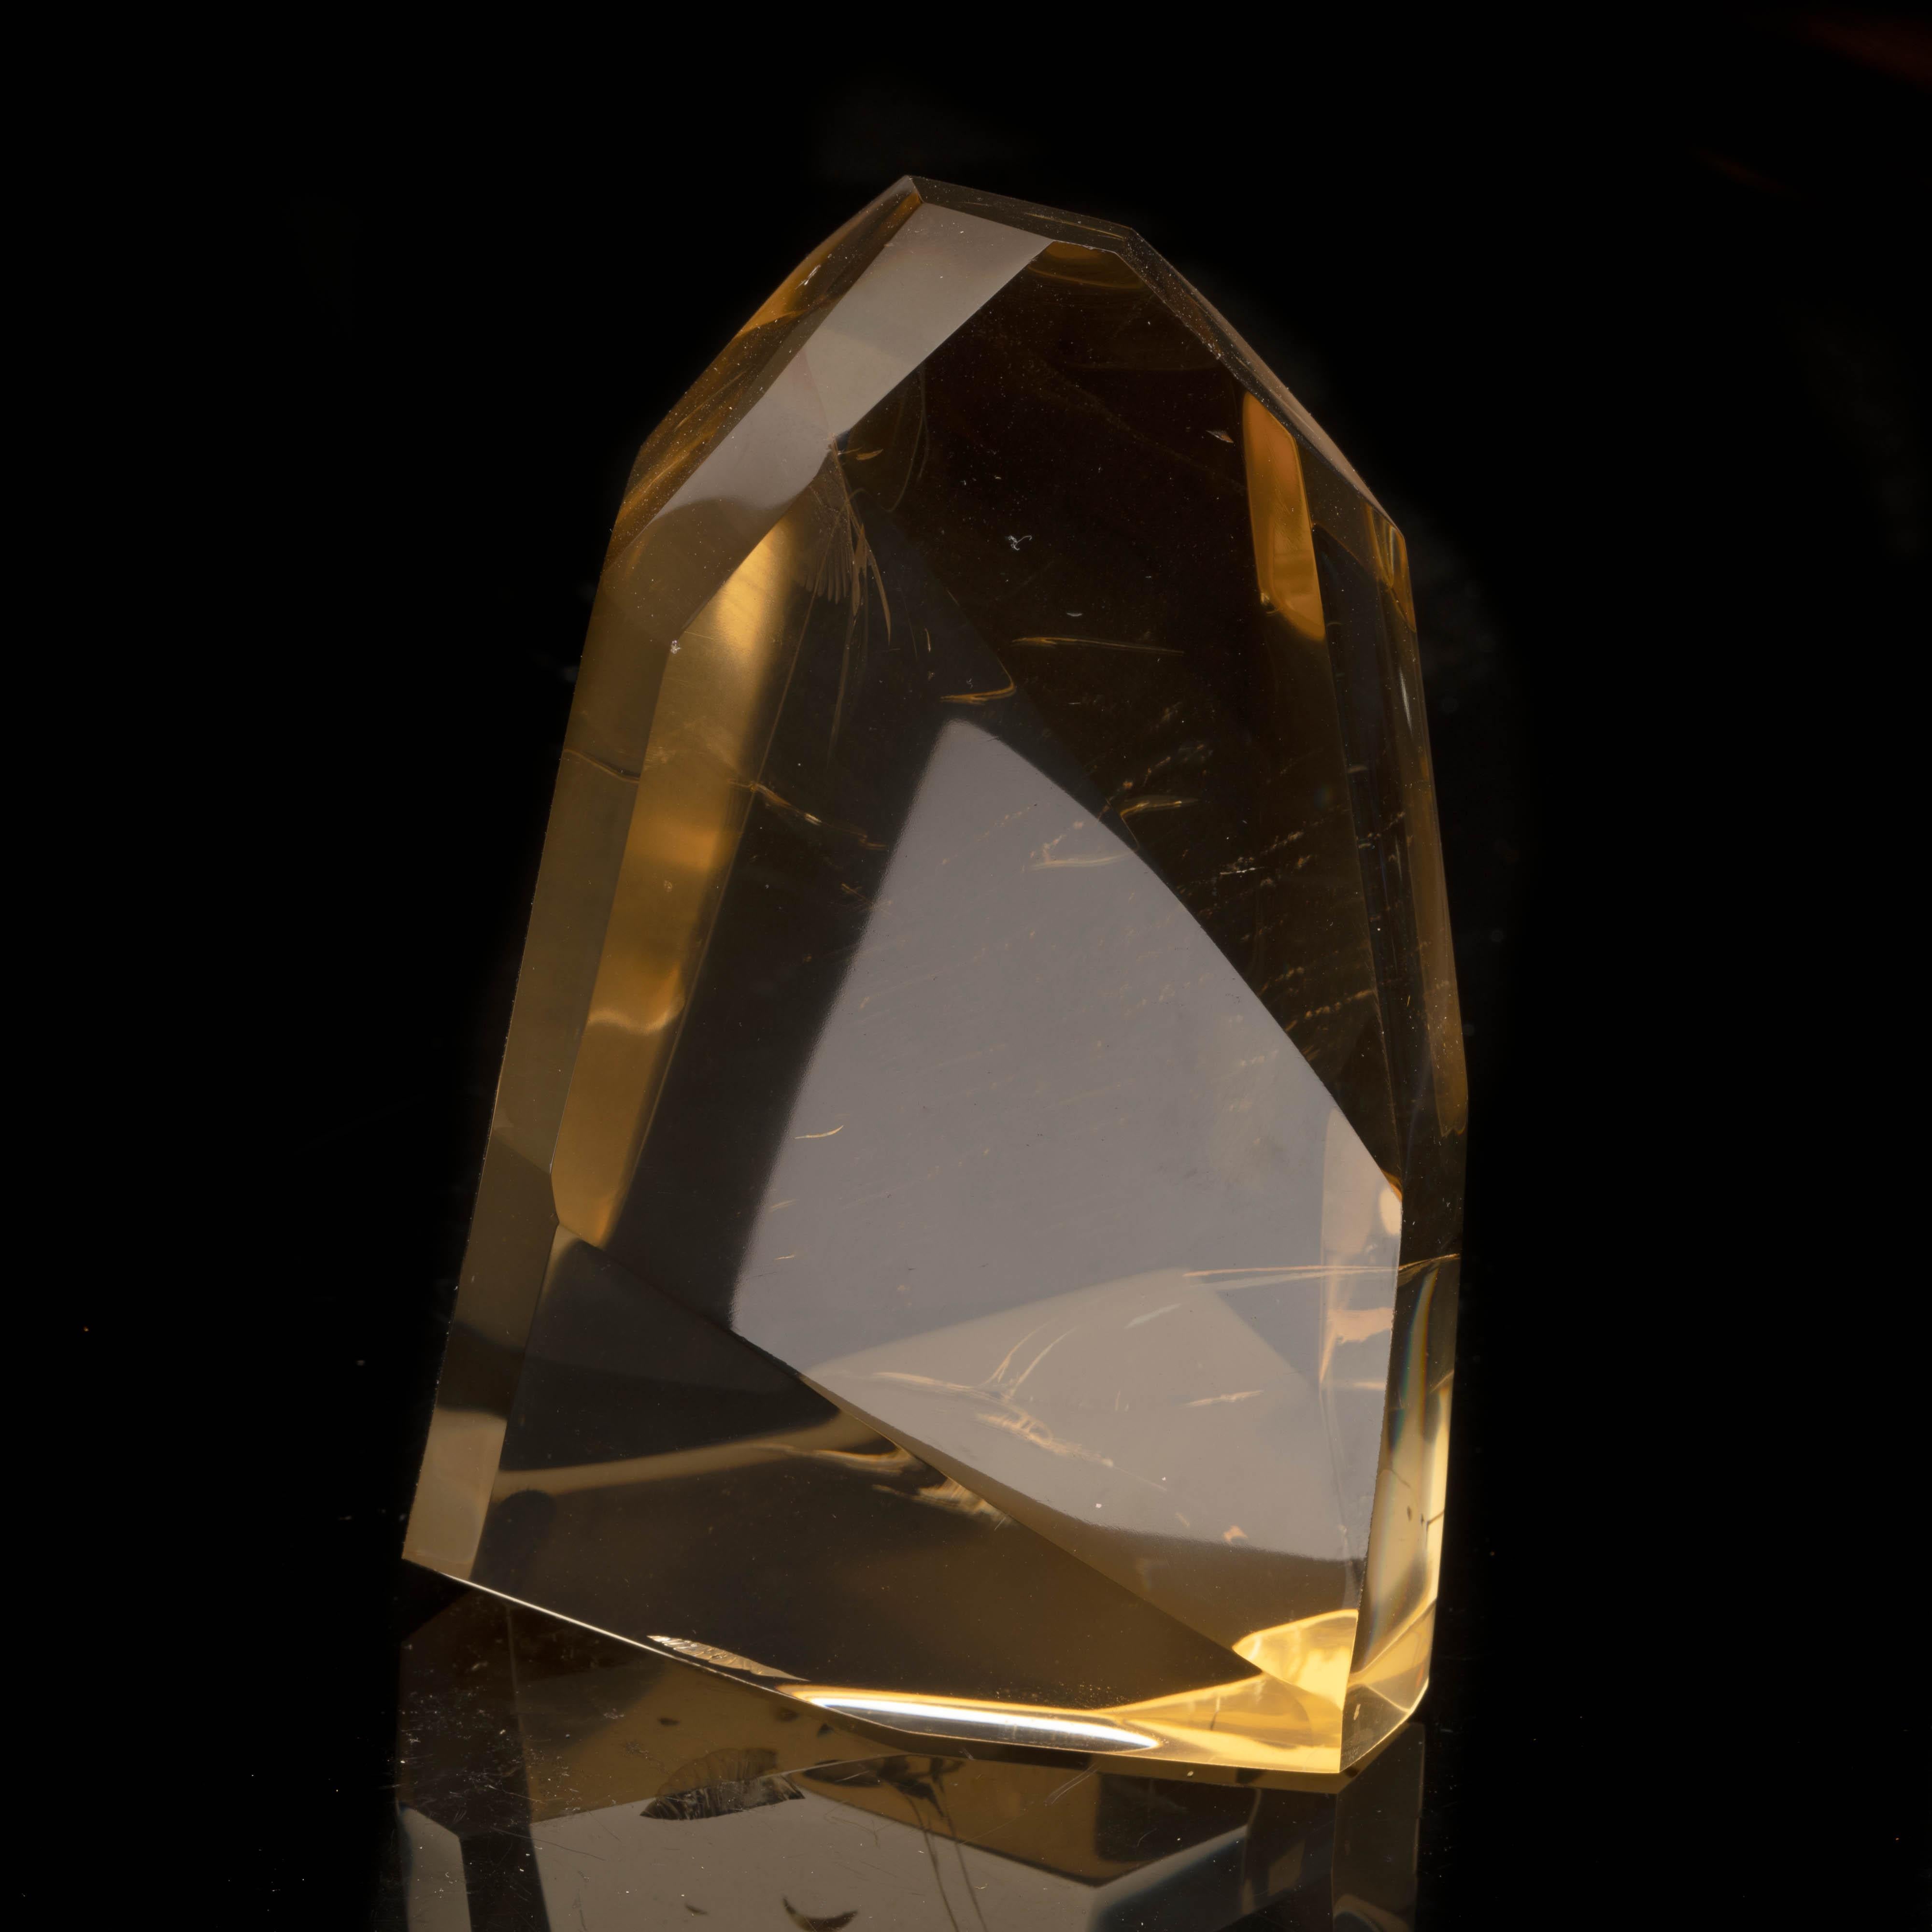 This gorgeous, lustrous, deeply-hued 1.75 lb citrine specimen – the finest genuine natural crystal from Madagascar – has been hand-polished into a unique freeform shape and features a nearly glass-clear interior. A standout piece to shine in any